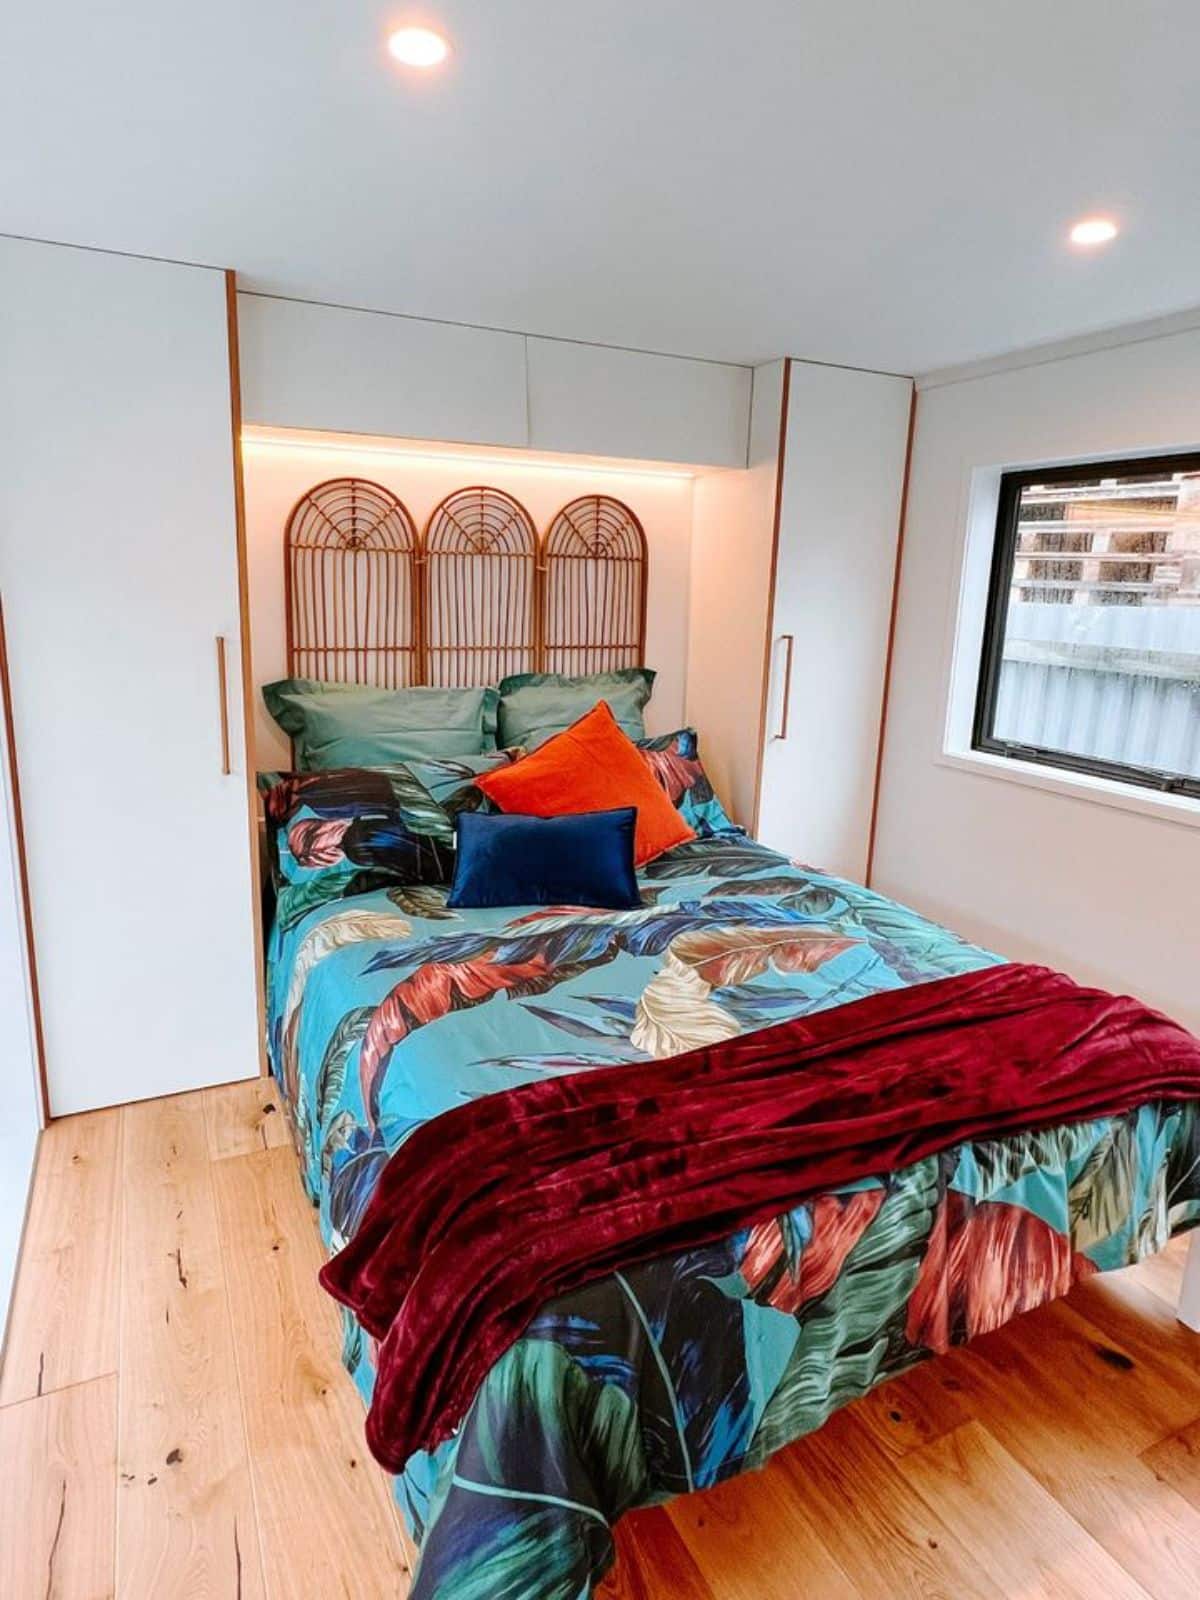 main floor bedroom is stunning with huge bed, wardrobe and still left with ample space